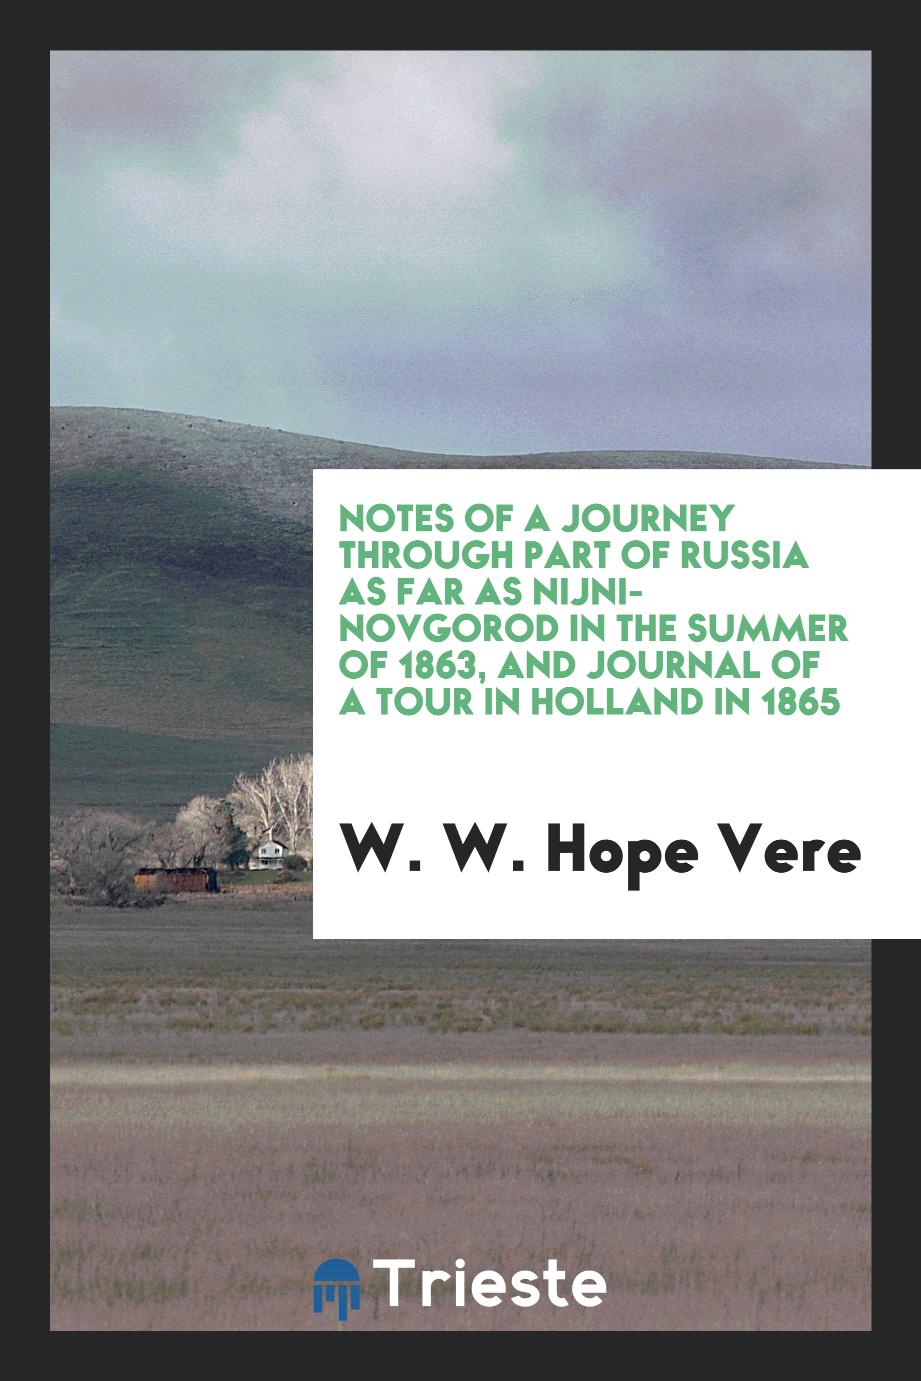 Notes of a journey through part of Russia as far as Nijni-Novgorod in the summer of 1863, and Journal of a tour in Holland in 1865